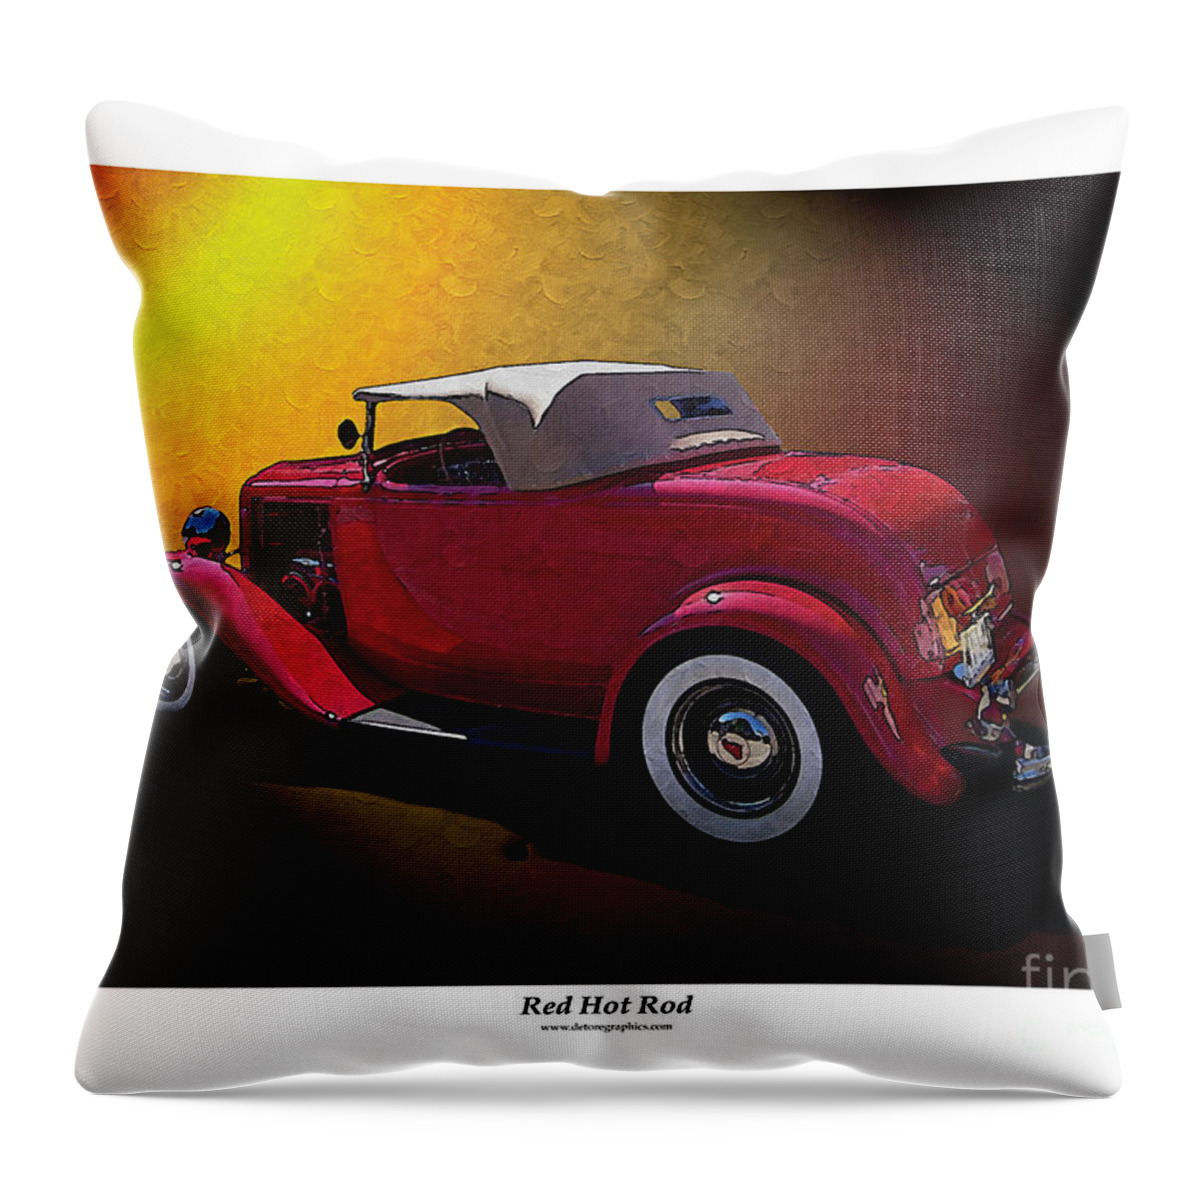  Red Throw Pillow featuring the photograph Red Hot Rod by Kenneth De Tore